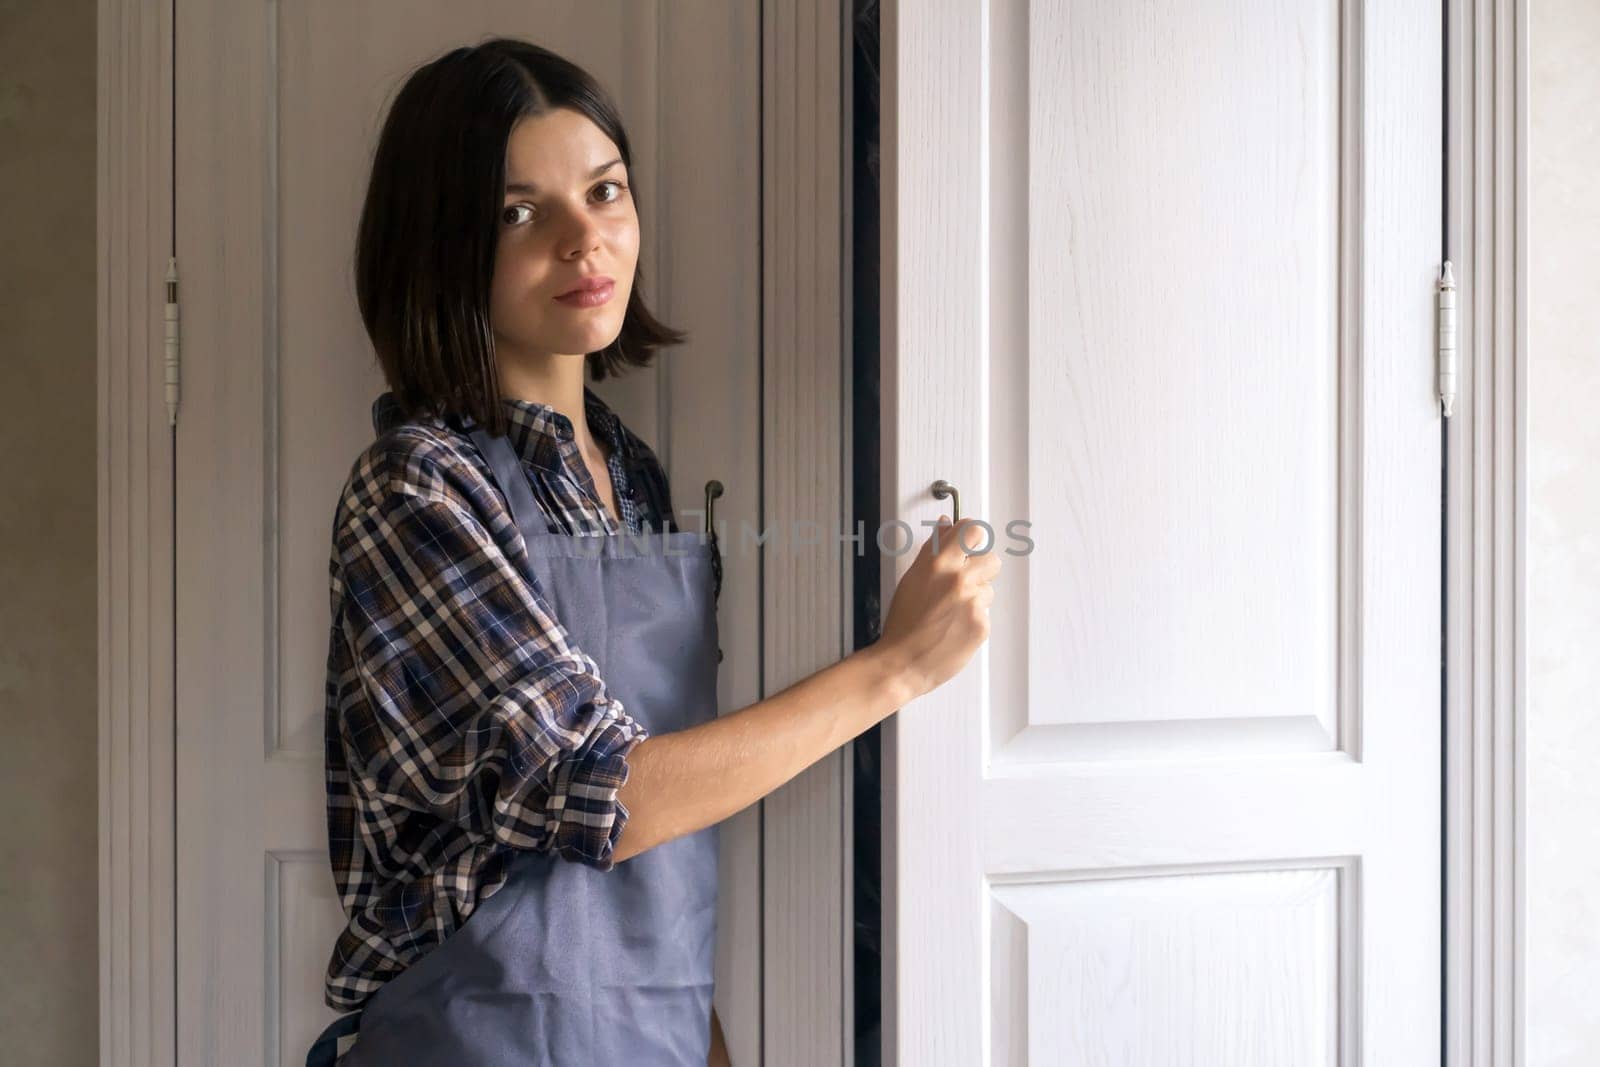 A young girl in casual clothes opens the door of a white wooden cabinet in her light, cozy room.